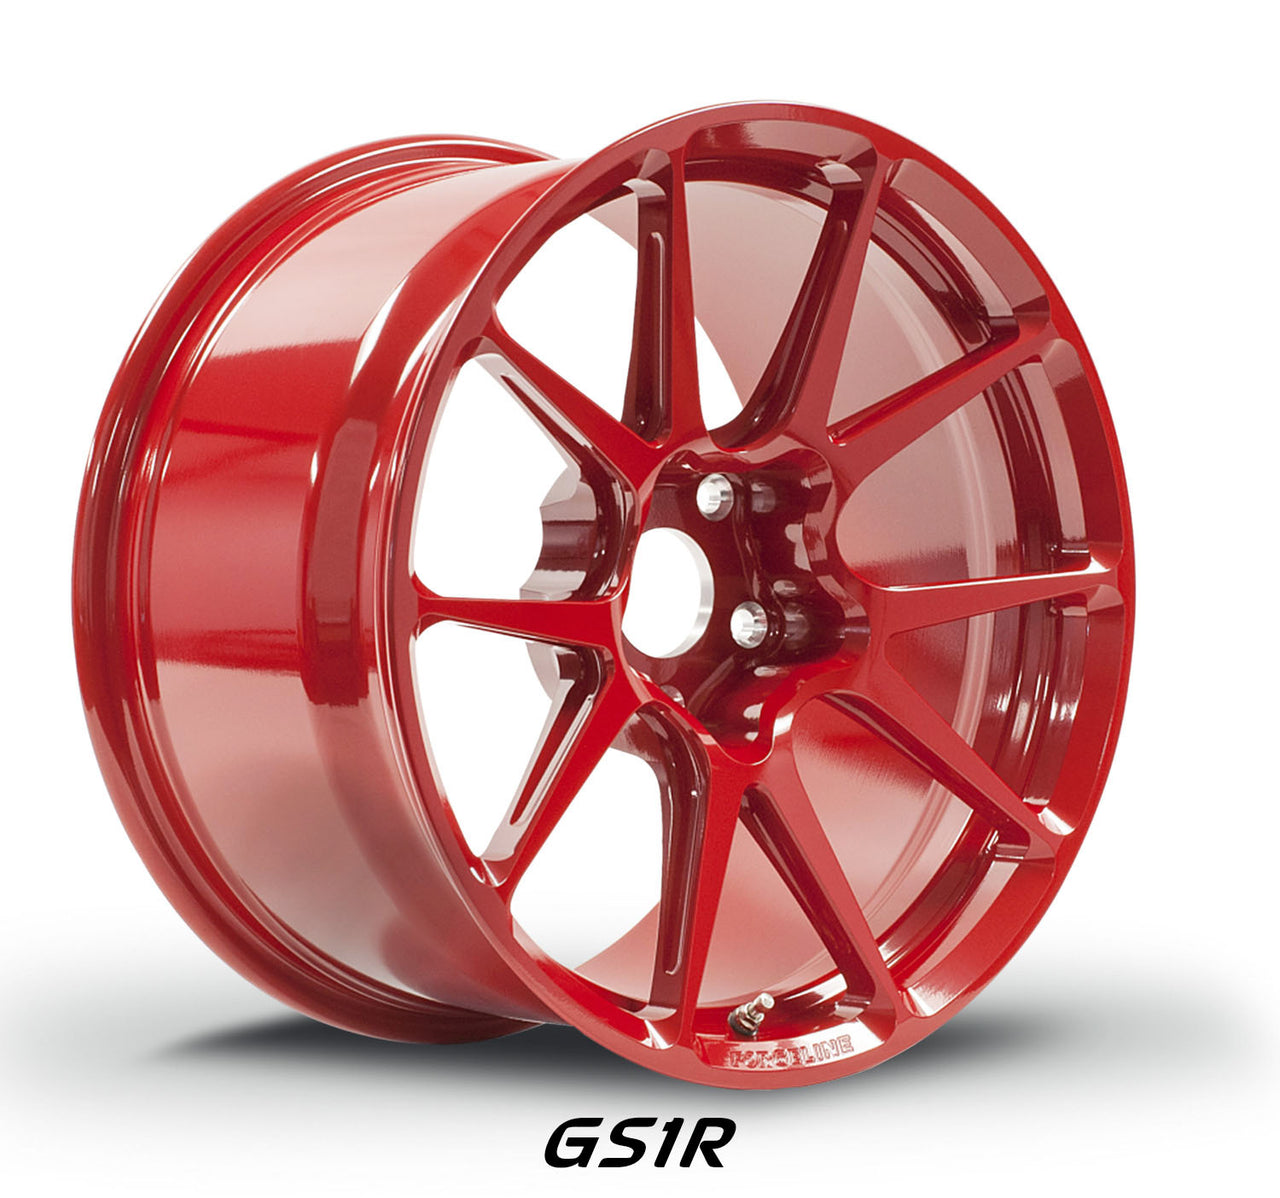 Red hot Forgeline Wheels GS1R in Gloss Red ready for the race with the Camaro Z/28 Gen 5.